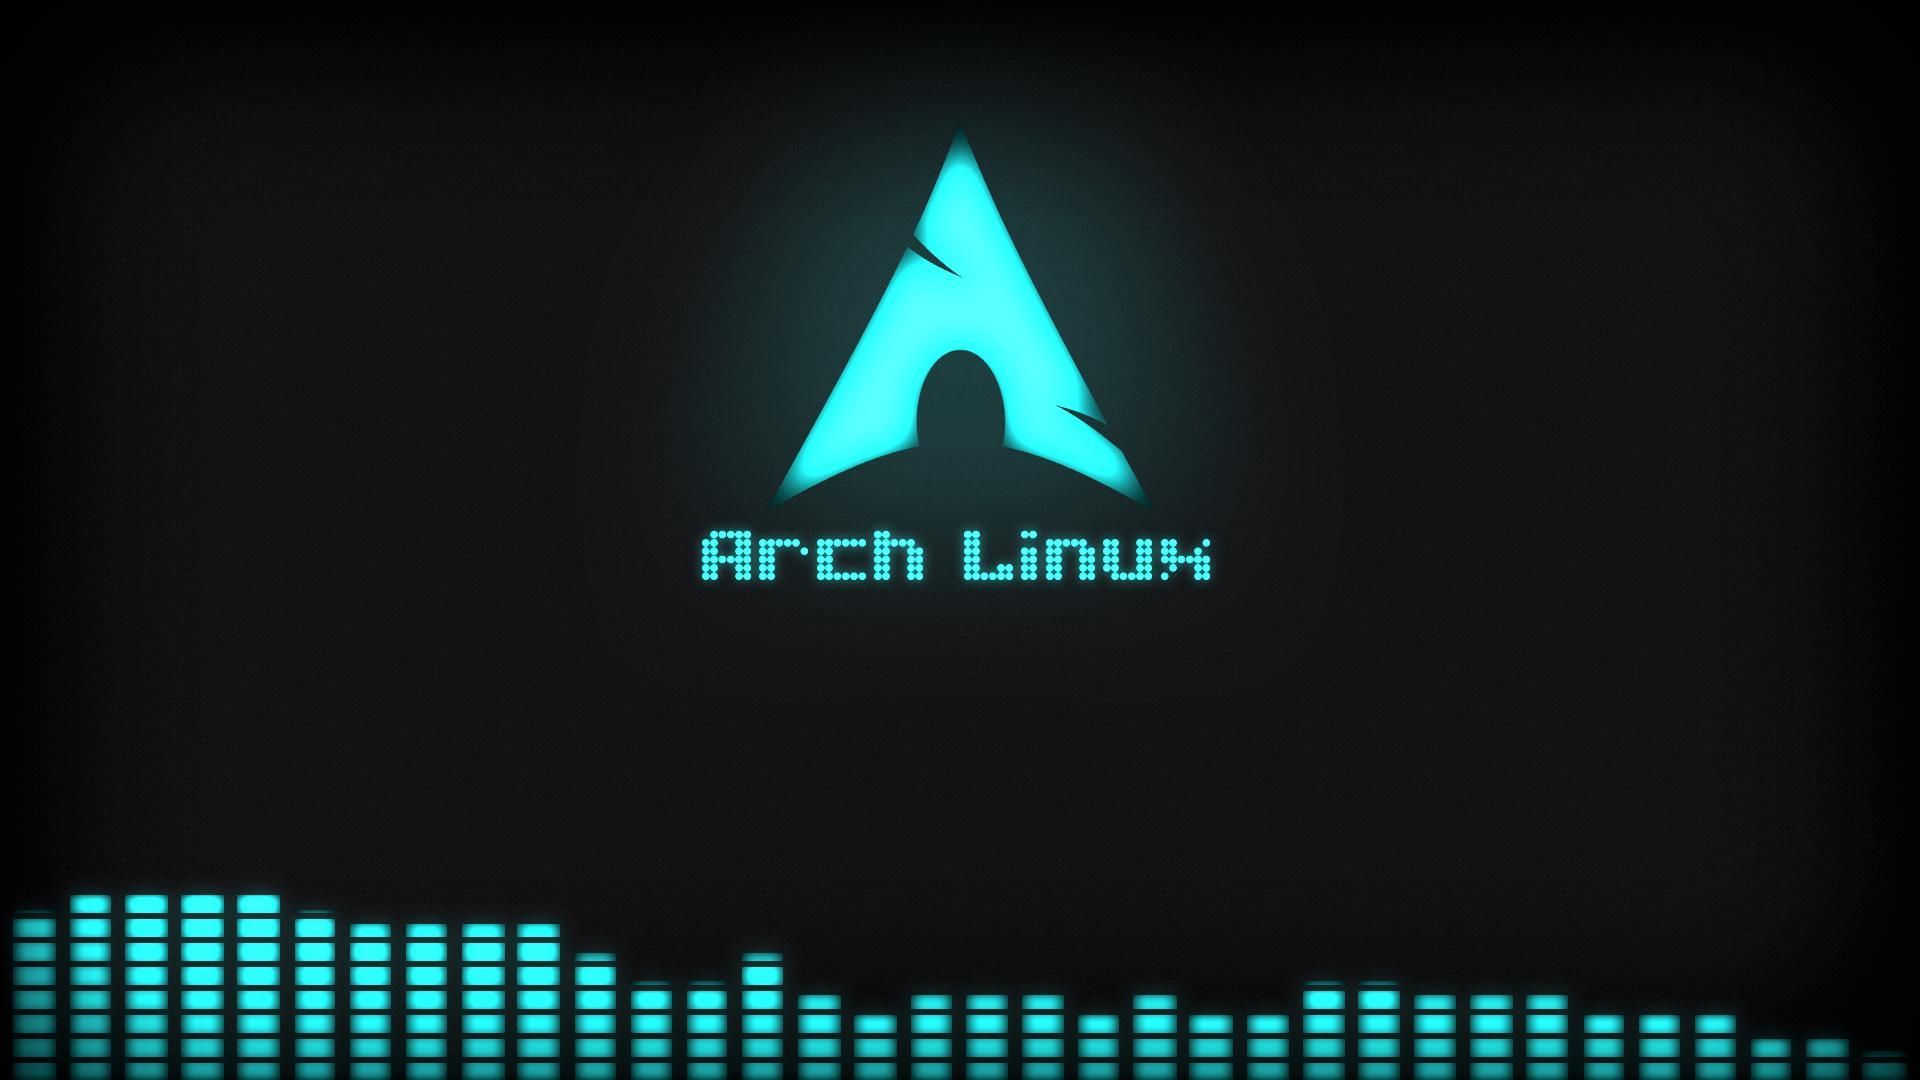 Arch background picture hd